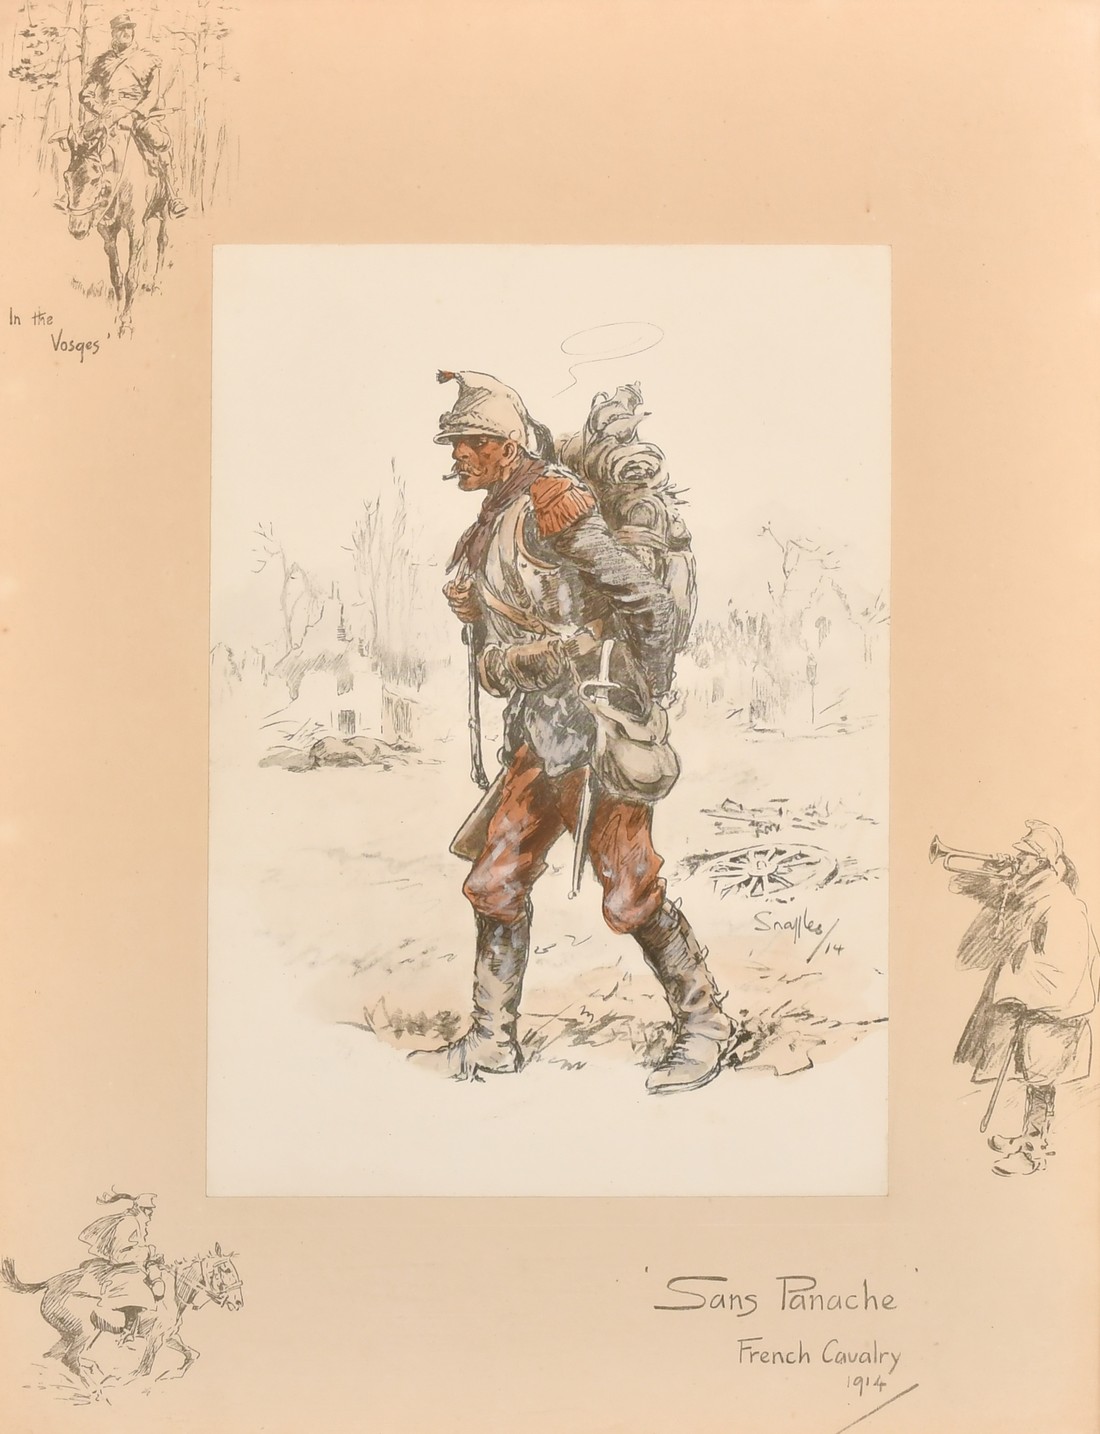 Snaffles, 'Sans Panache' and 'Le Poilu', two hand coloured prints, each around 11" x 8" (28 x 20cm),